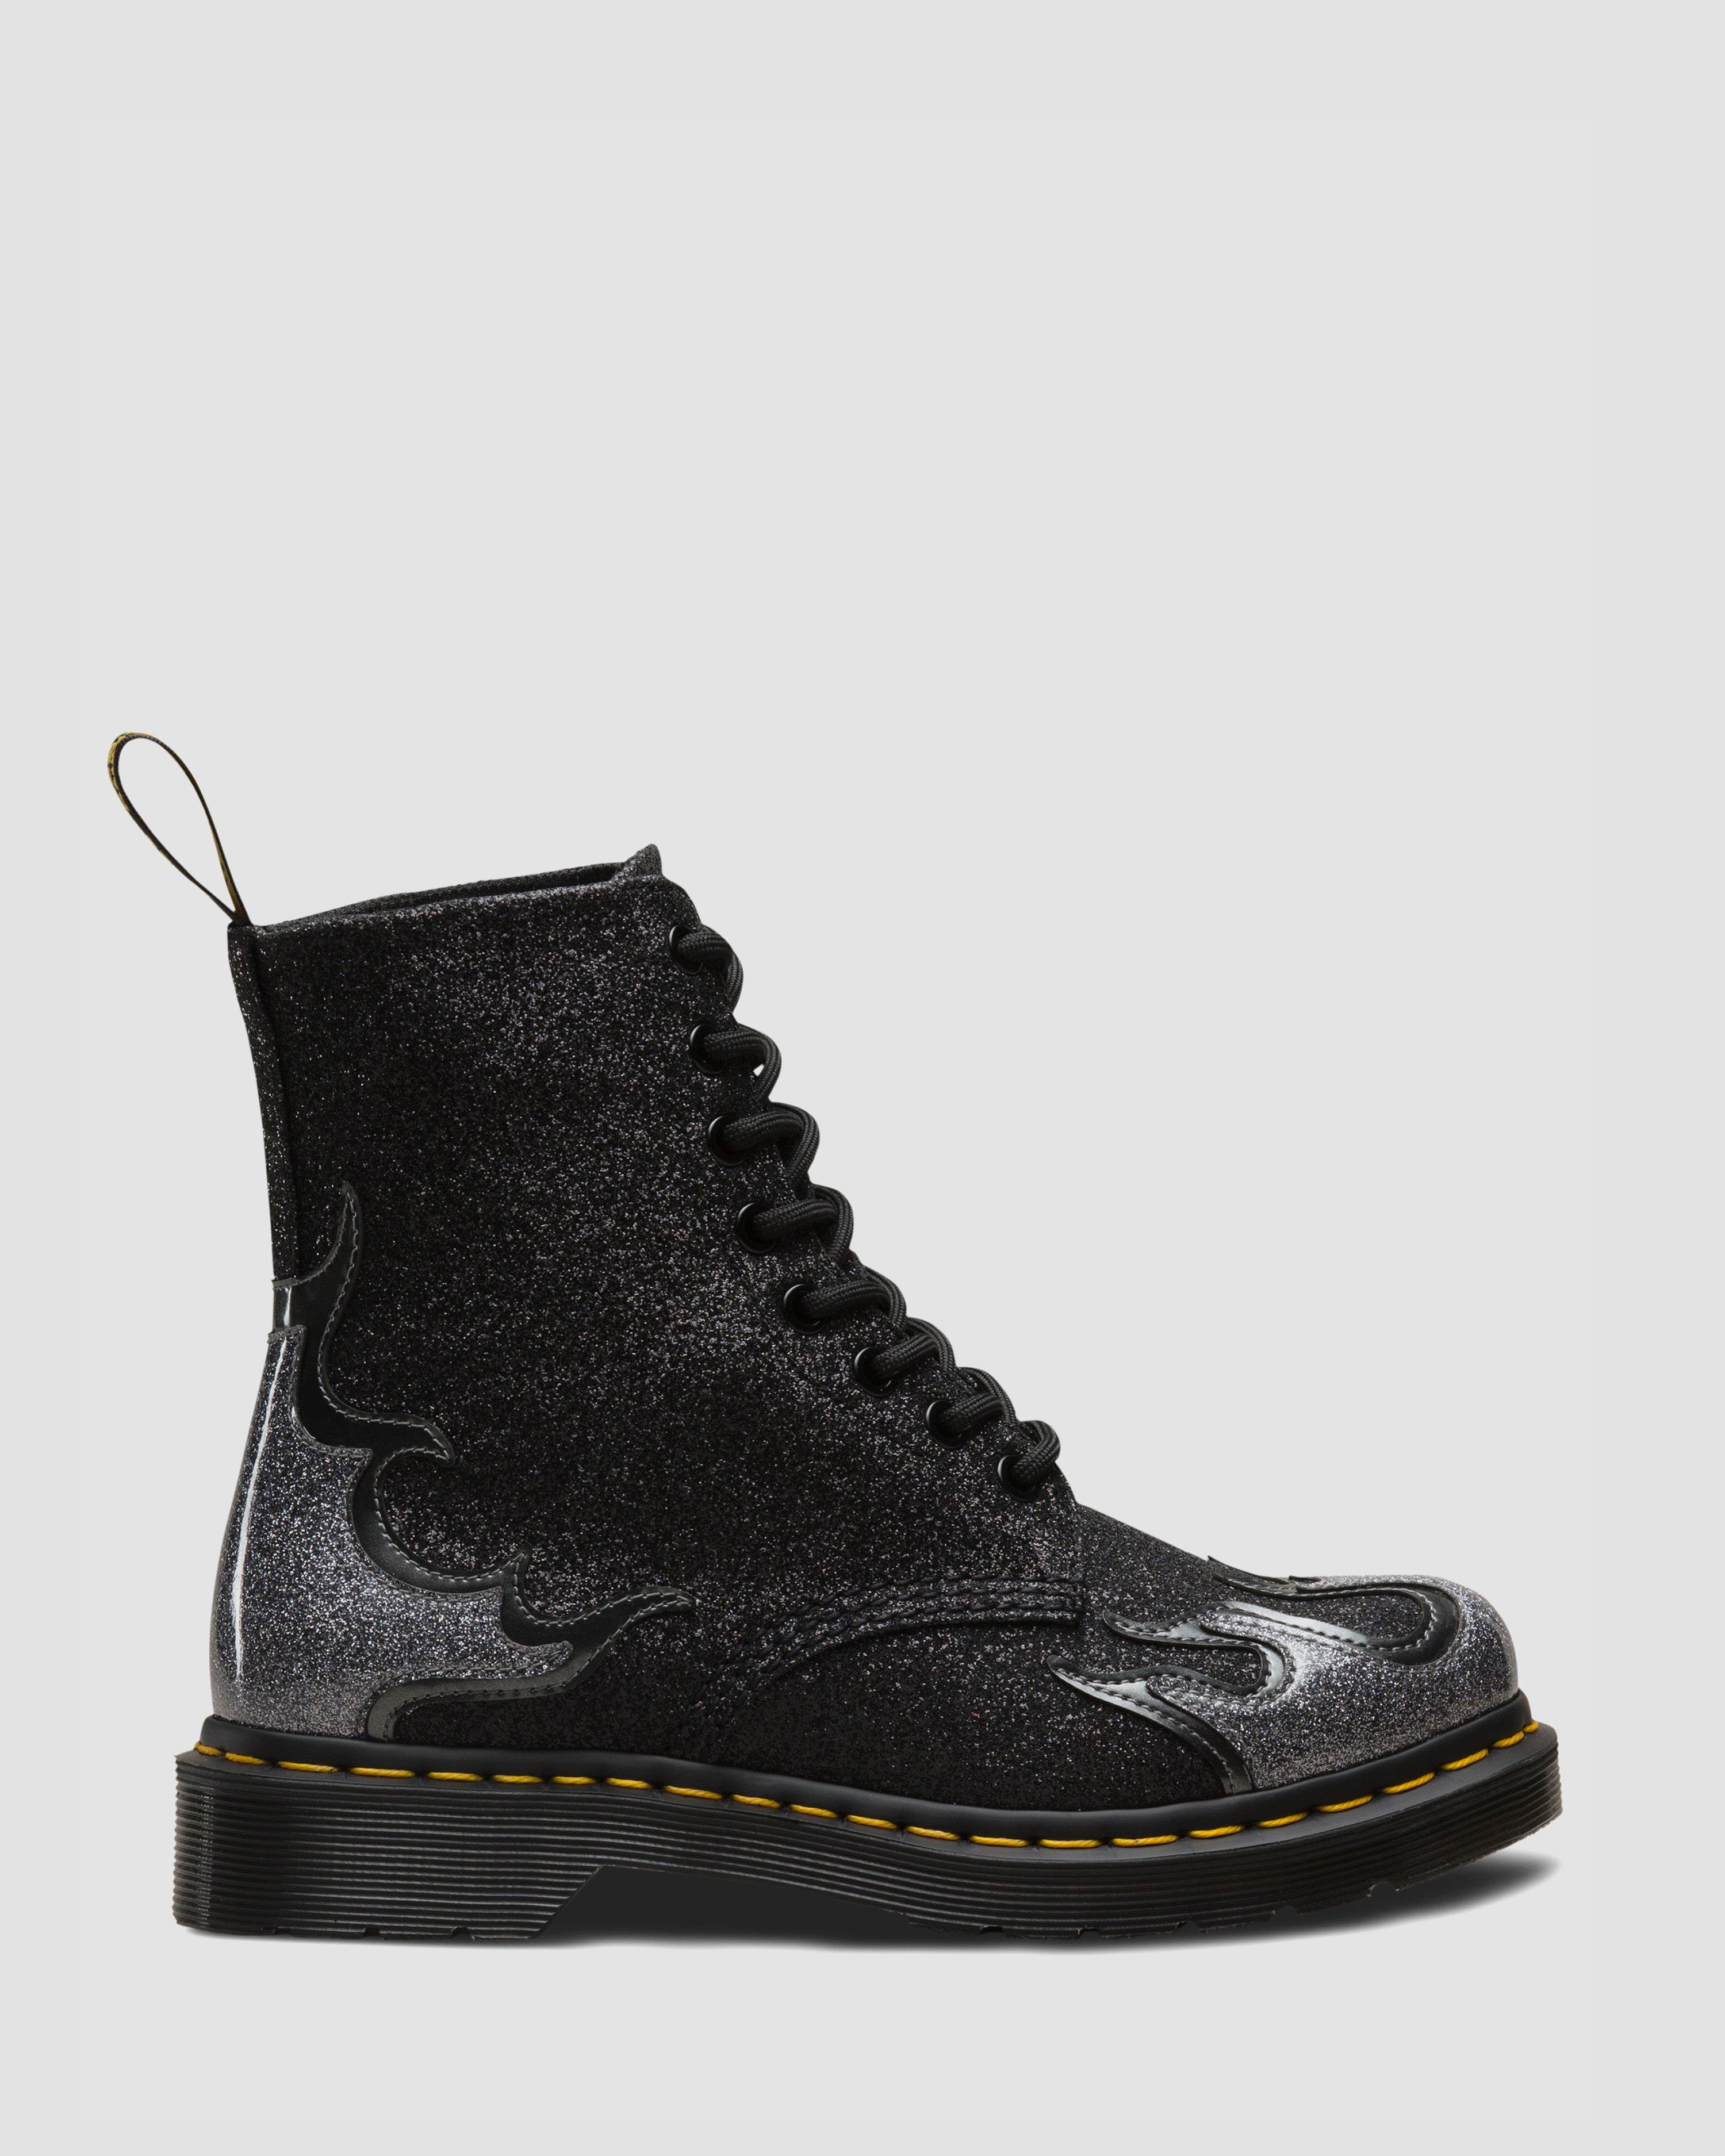 1460 PASCAL FLAME GLITTER Dr. Martens